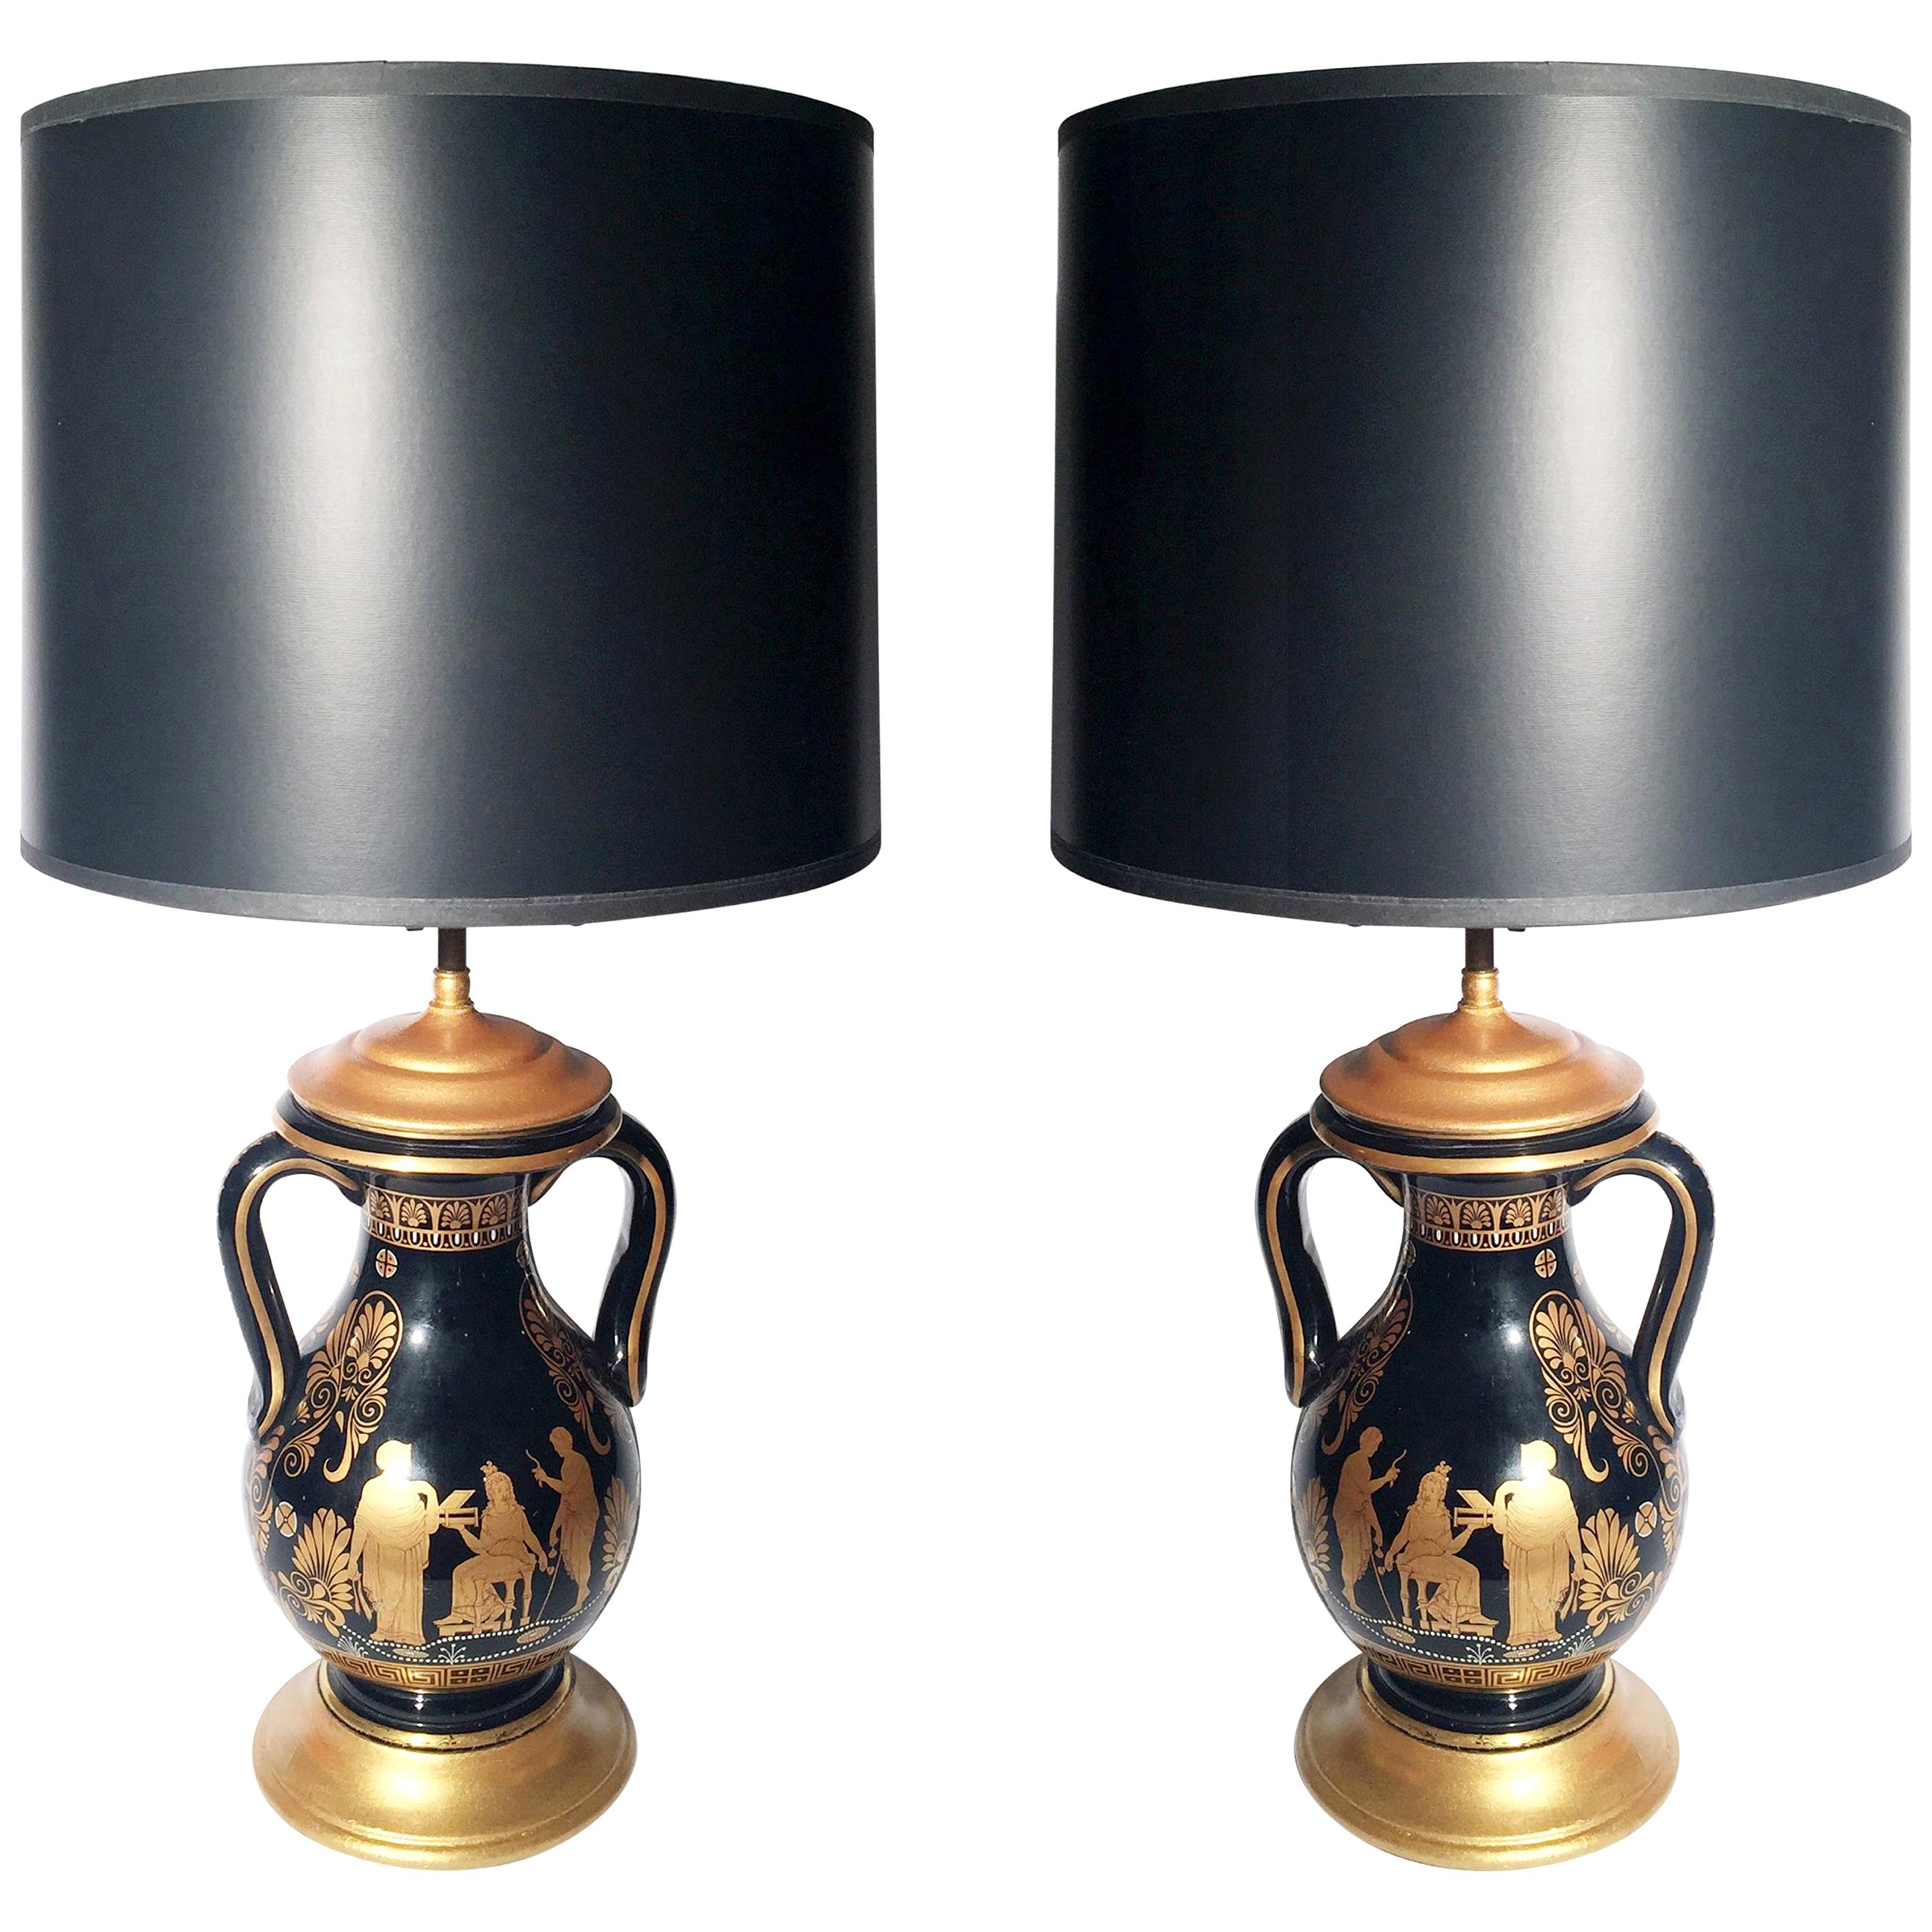 Pair of Black and Gilt Neoclassical Urn Lamps